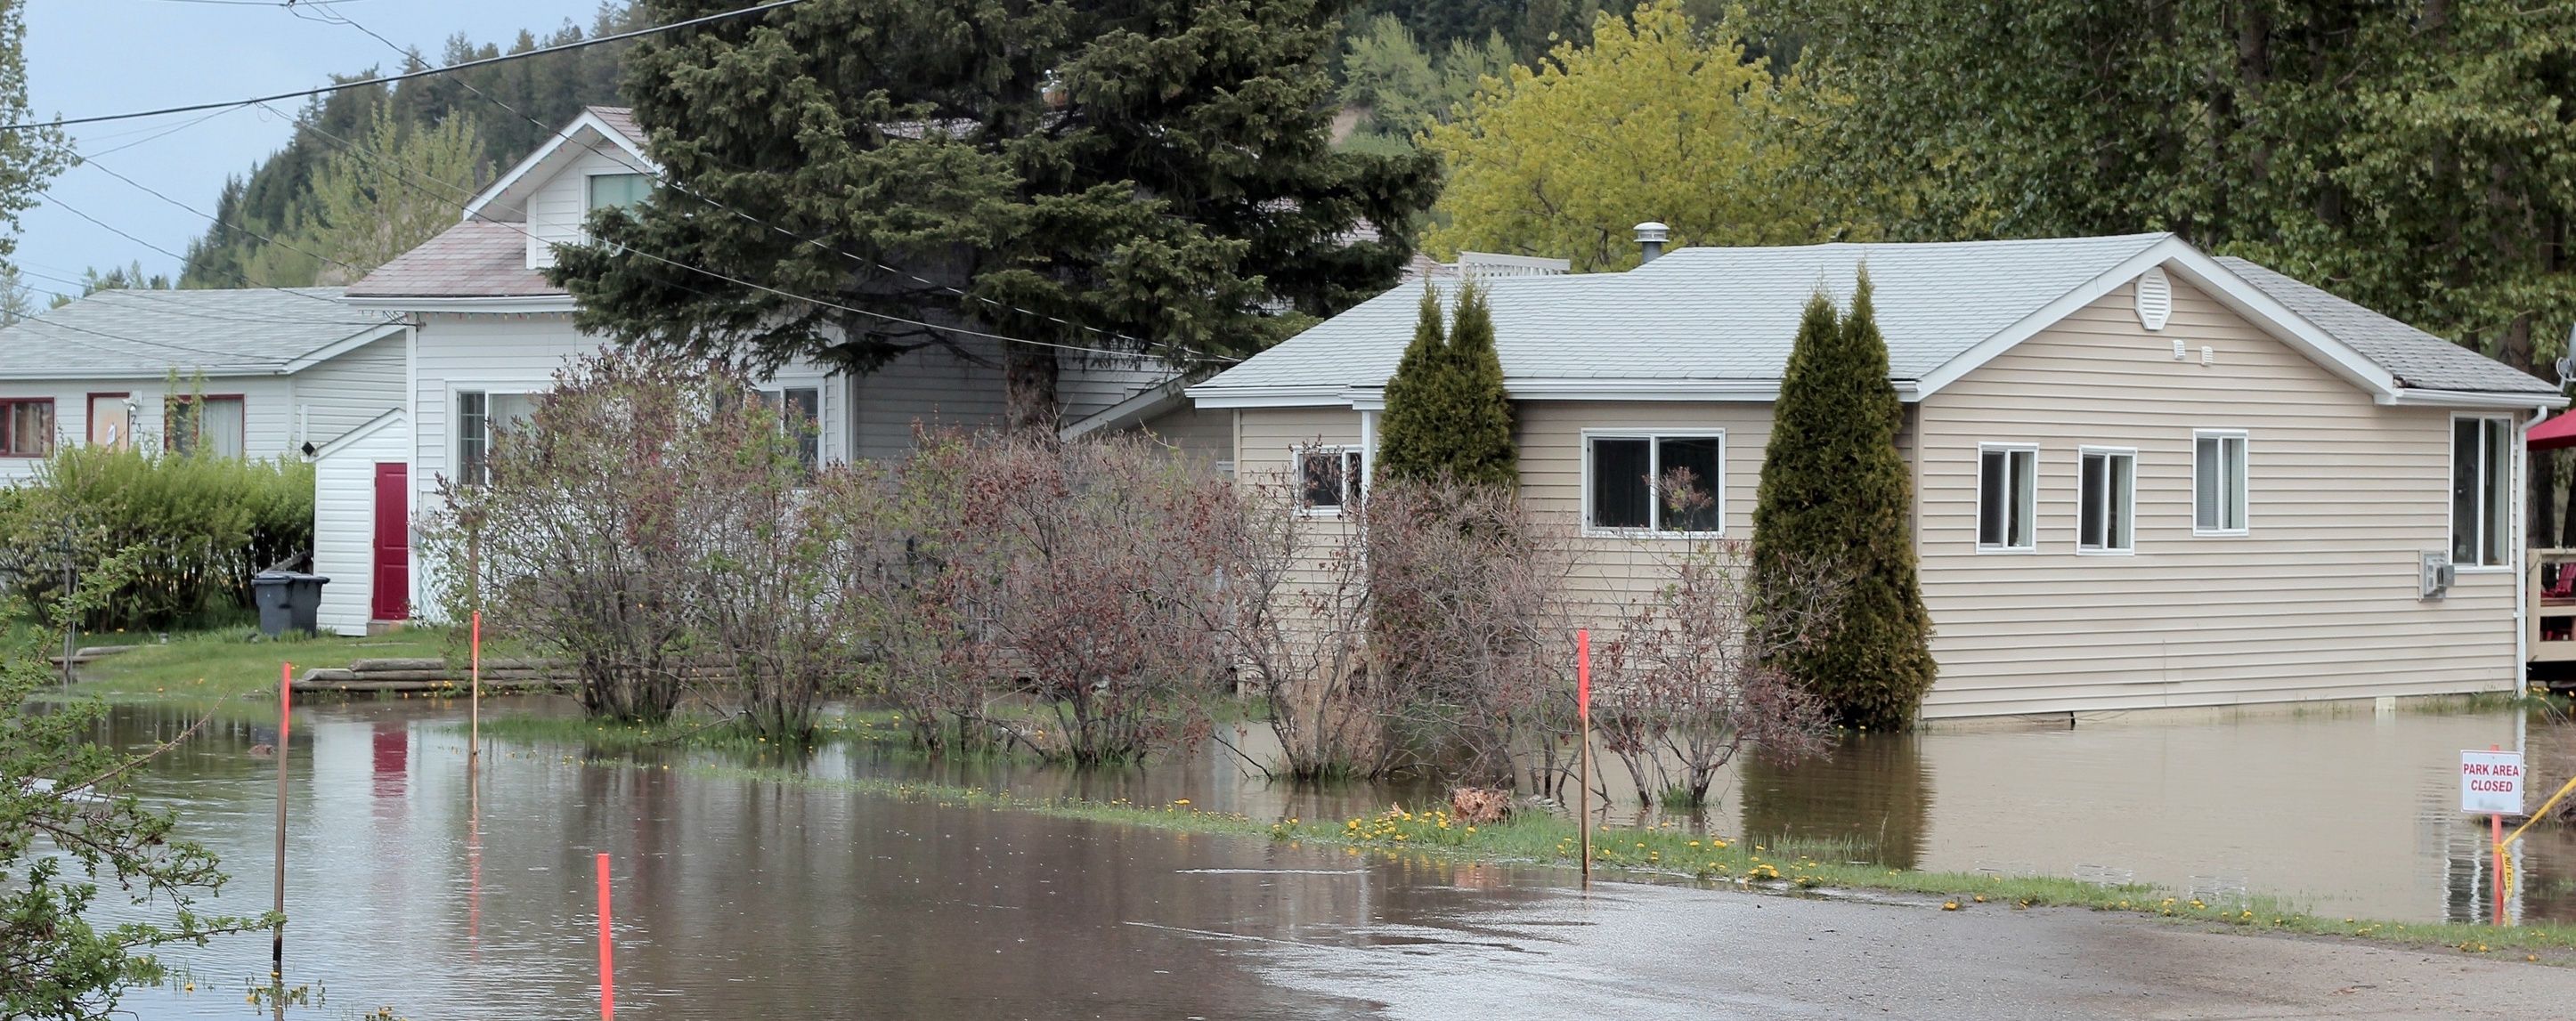 (featured)encapsulating after flooding (stock photo).jpg